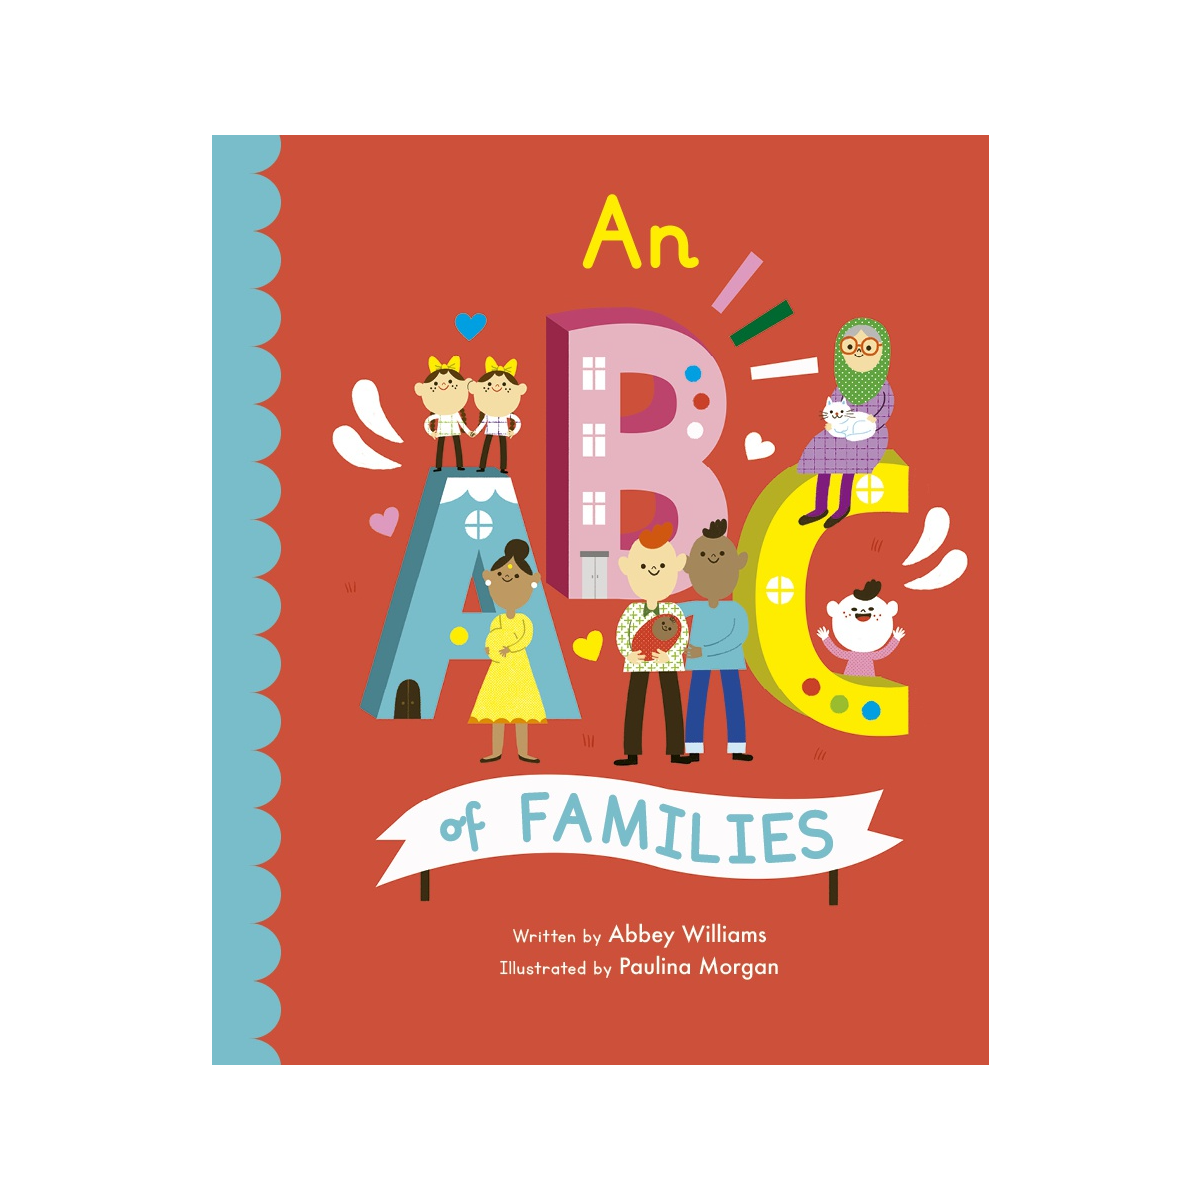 An ABC of Families - DIGS